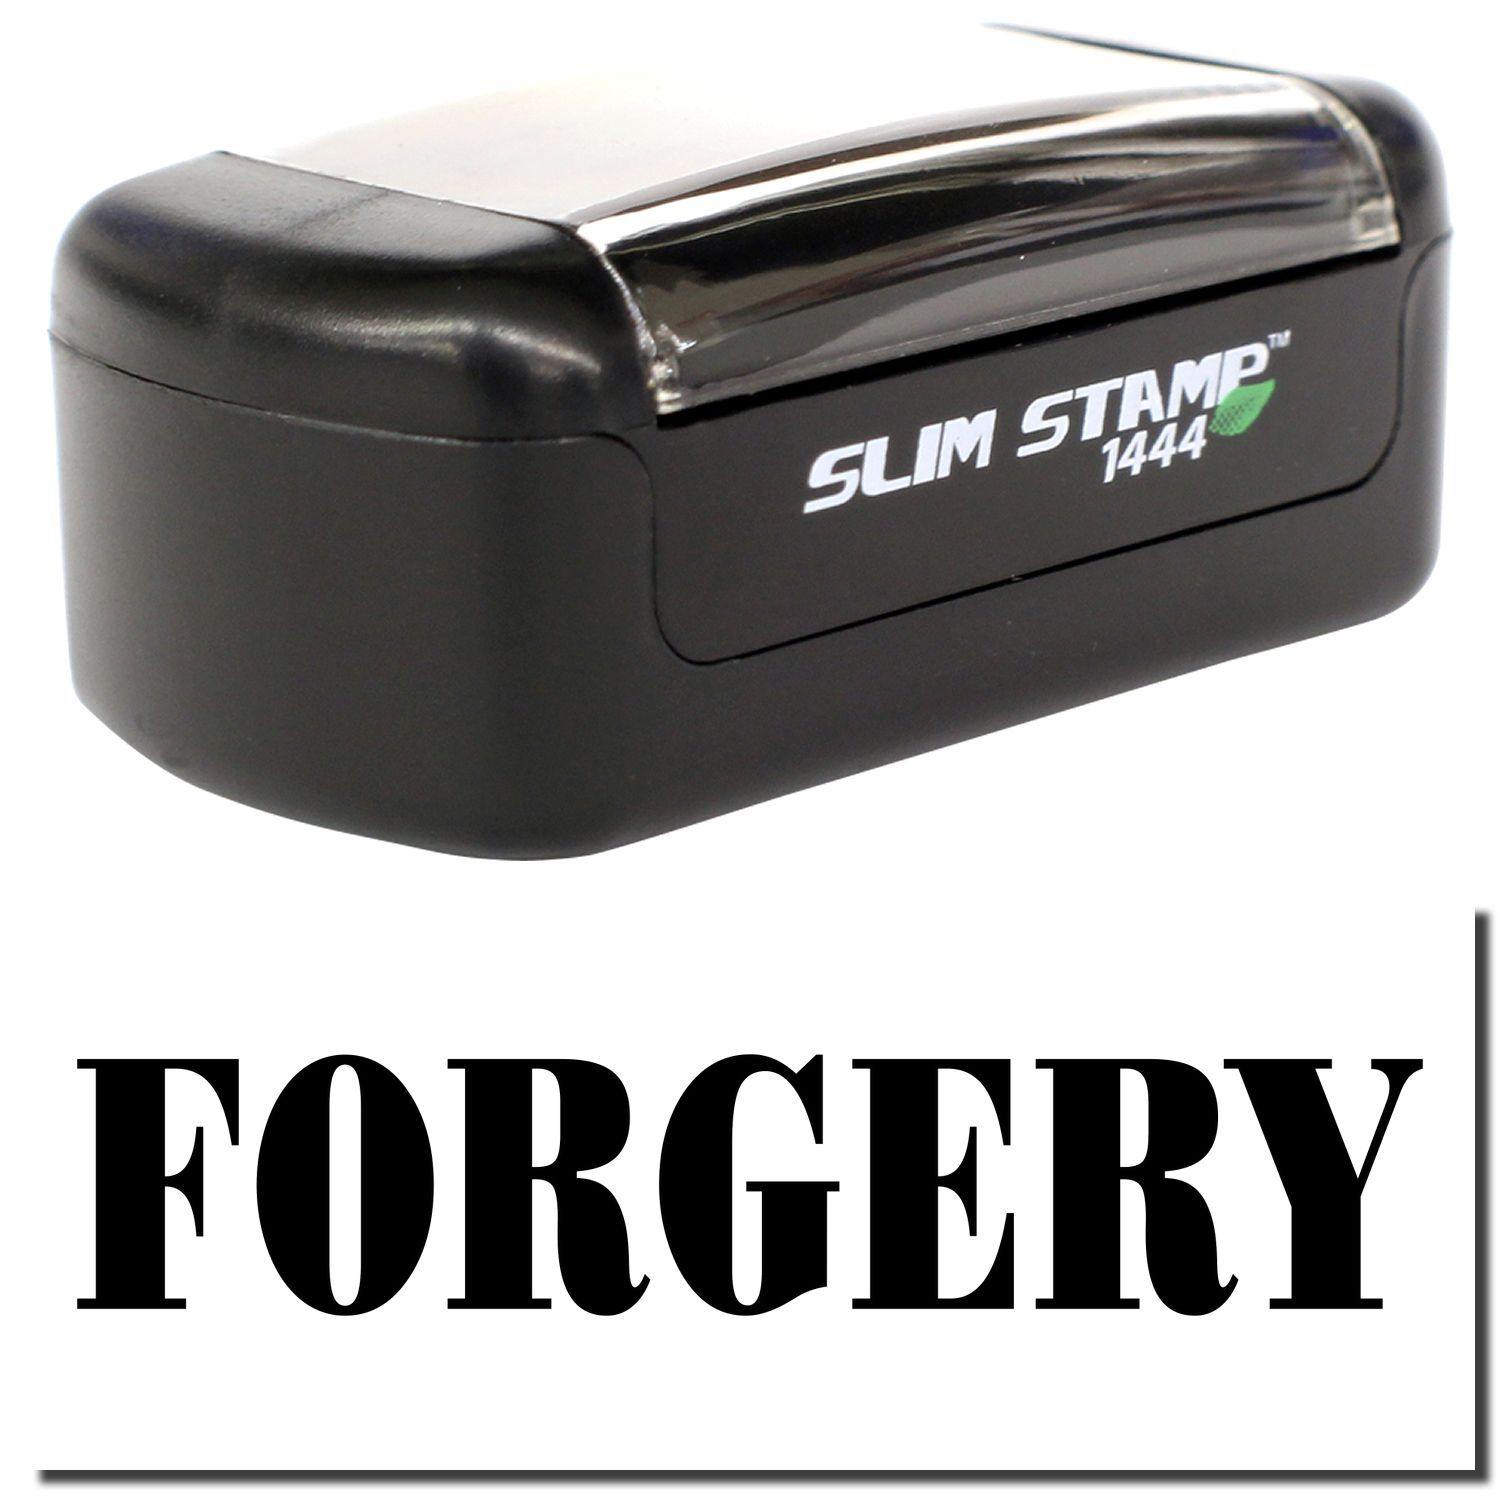 A stock office pre-inked stamp with a stamped image showing how the text "FORGERY" is displayed after stamping.